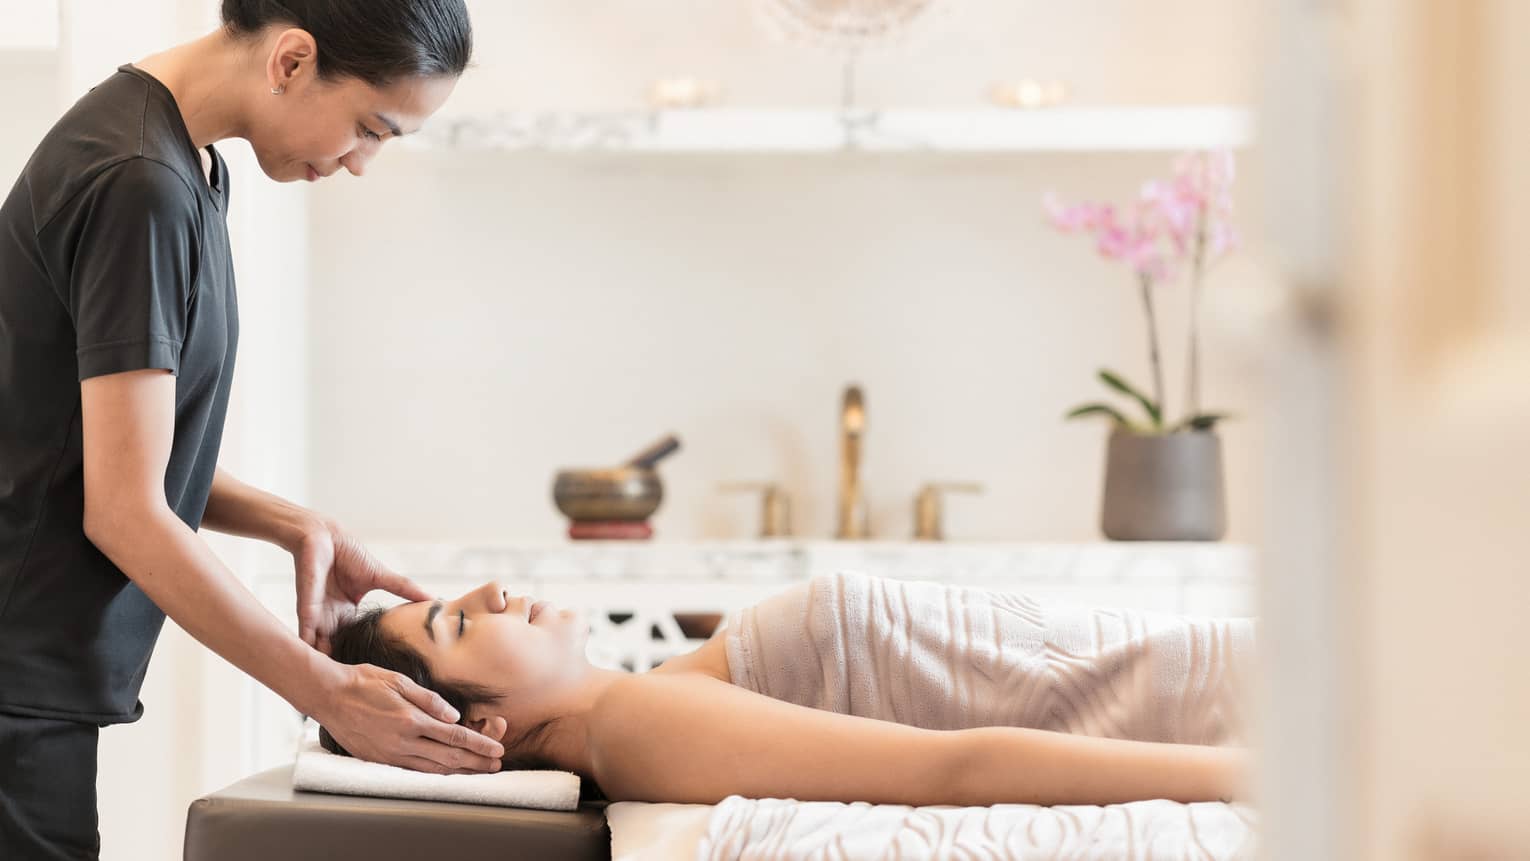 Massage therapist places hands on side of woman's face as she lays under a sheet on spa table